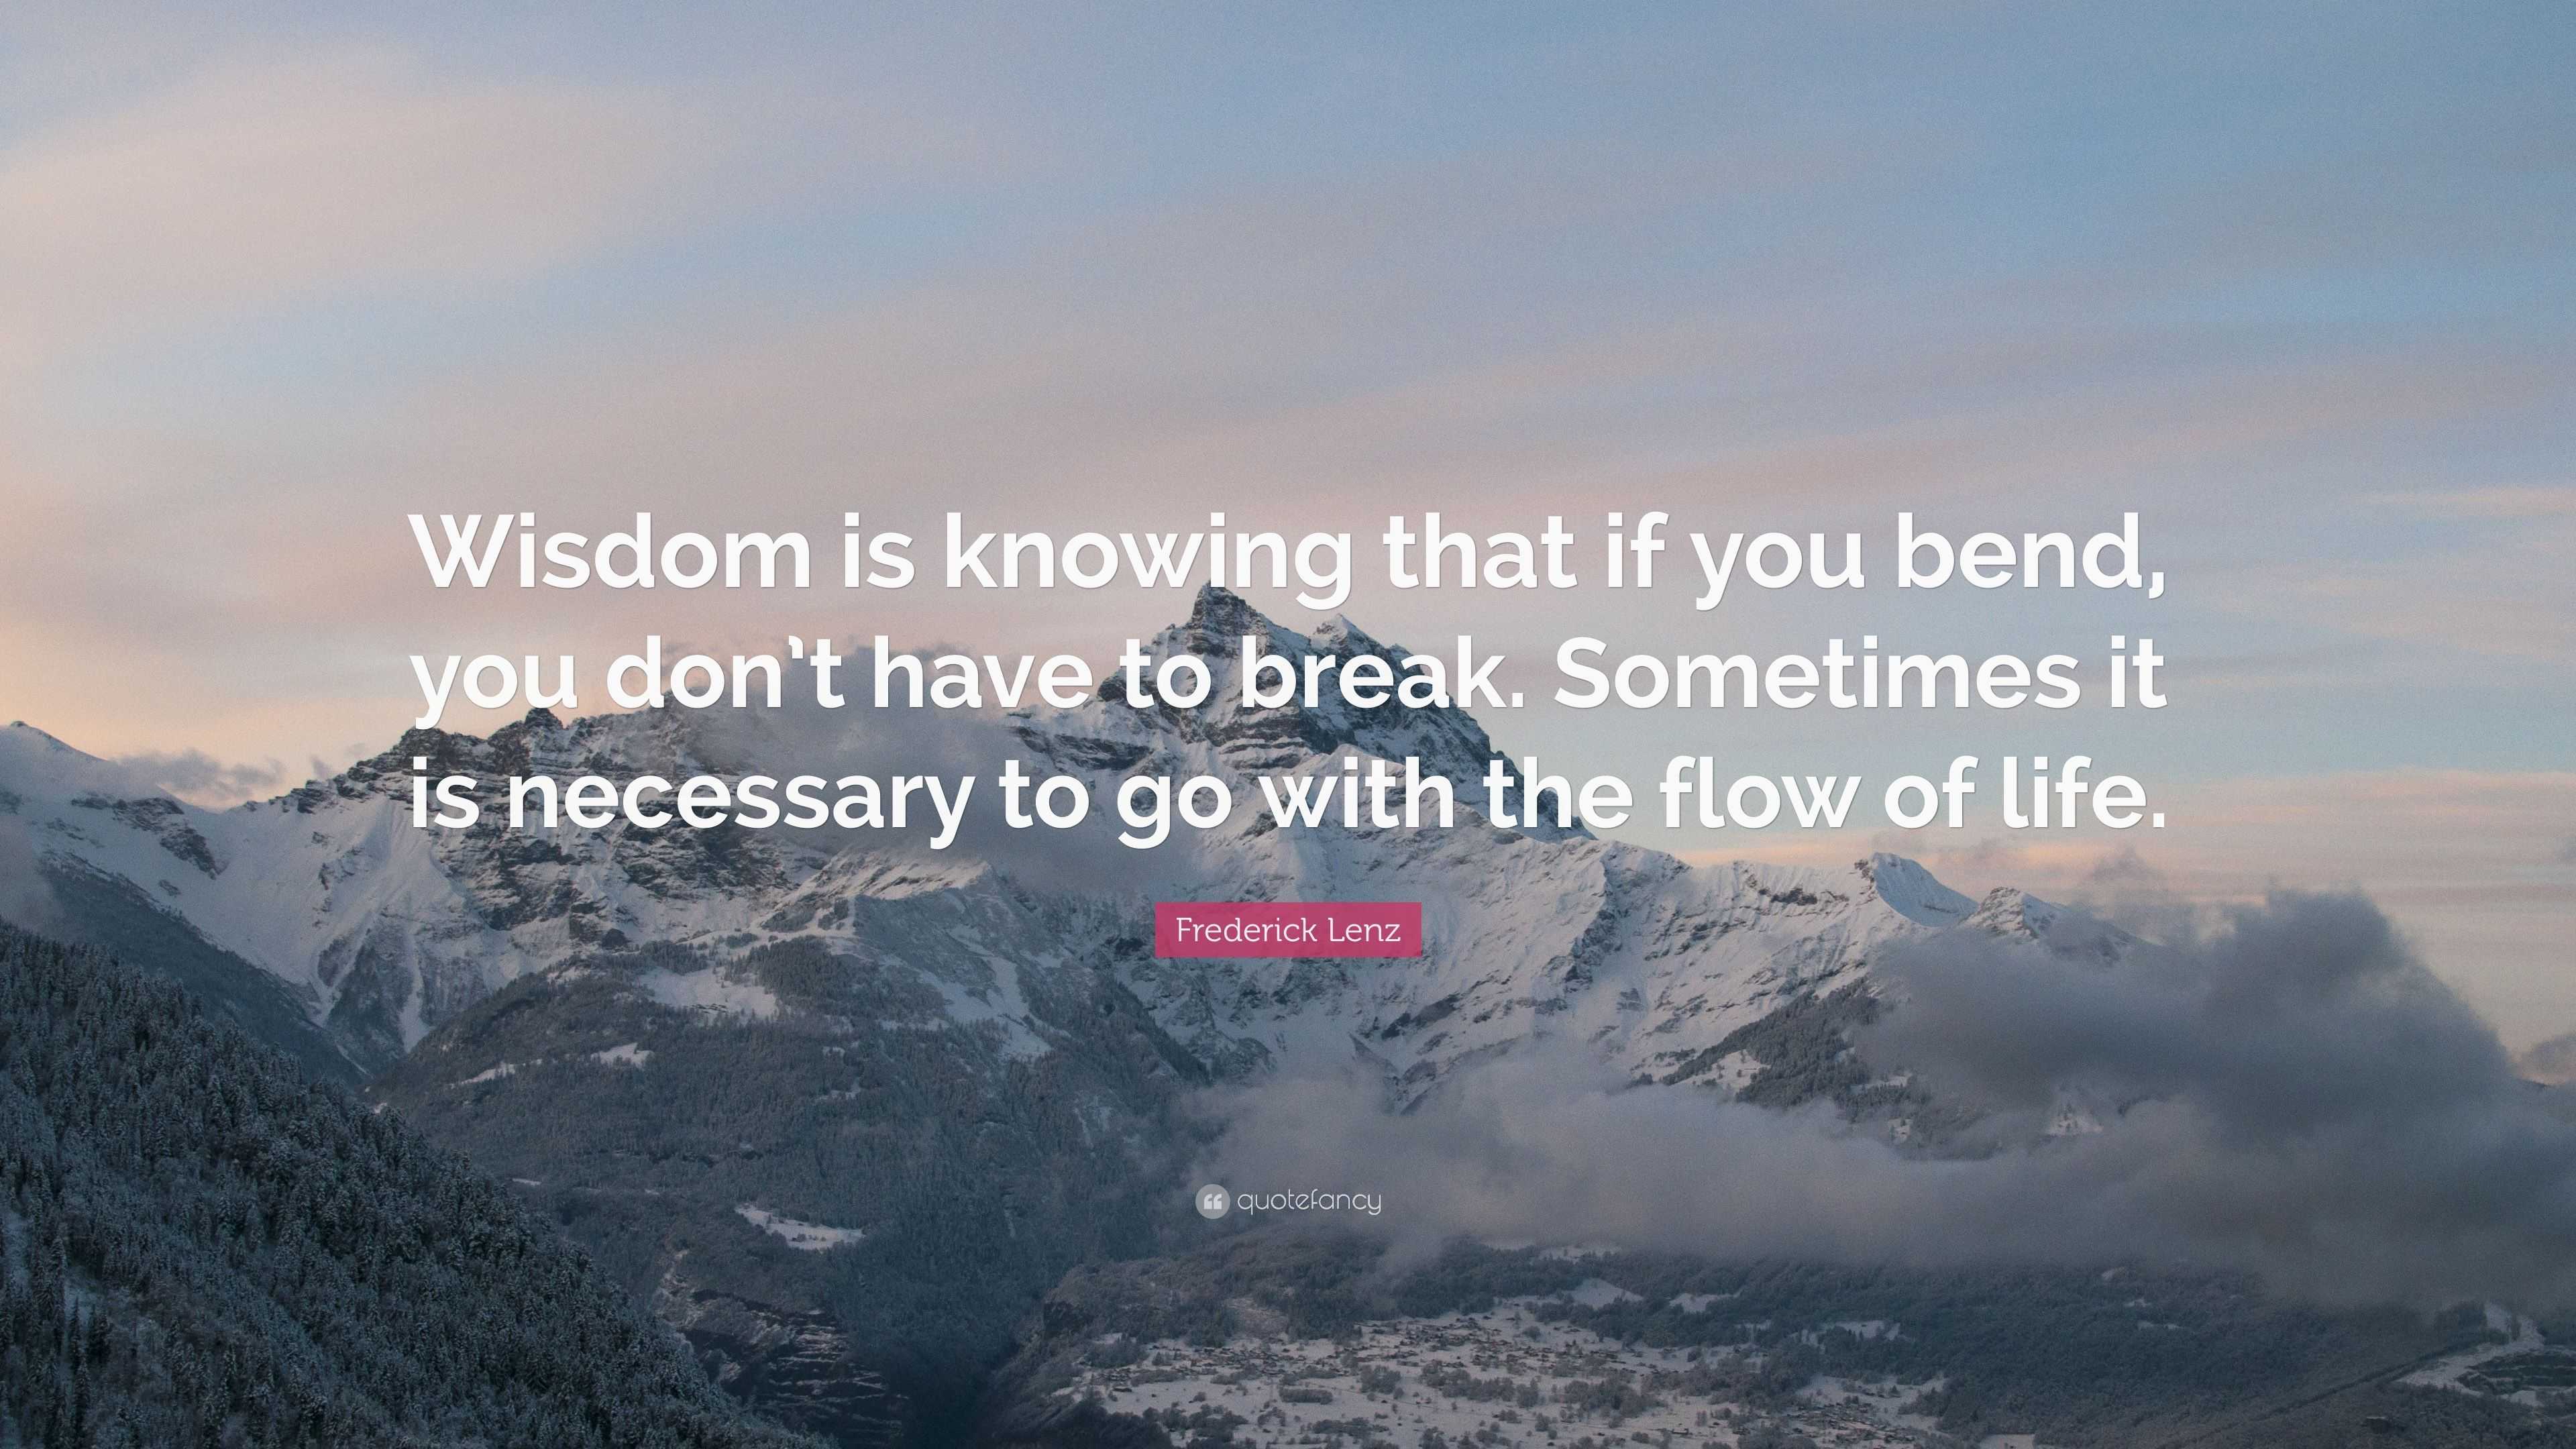 Frederick Lenz Quote: “Wisdom is knowing that if you bend, you don